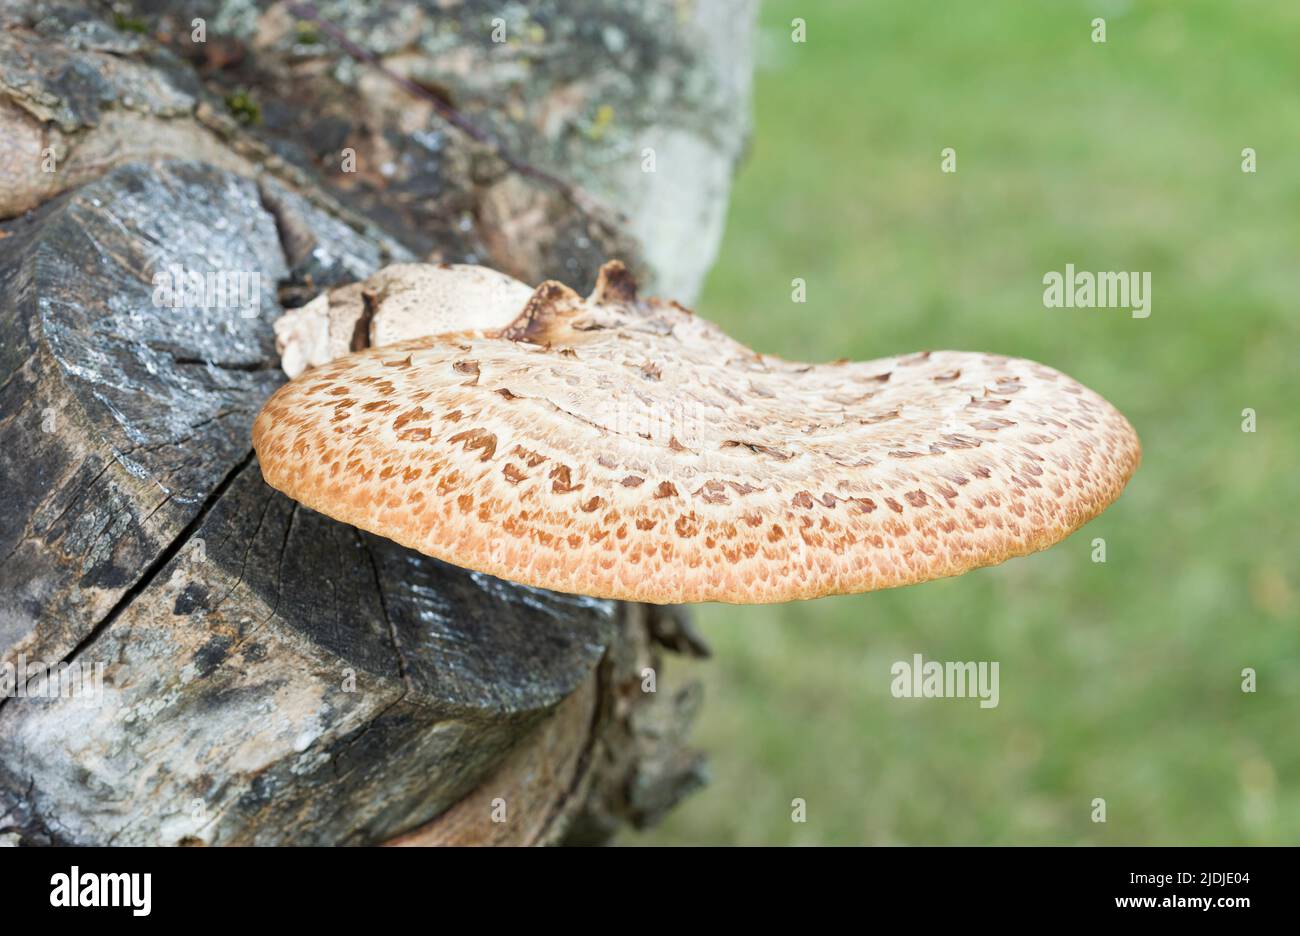 Dryads saddle (cerioporus squamosus or polyporous squamosus), edible bracket fungus growing on a sycamore tree in a UK garden Stock Photo